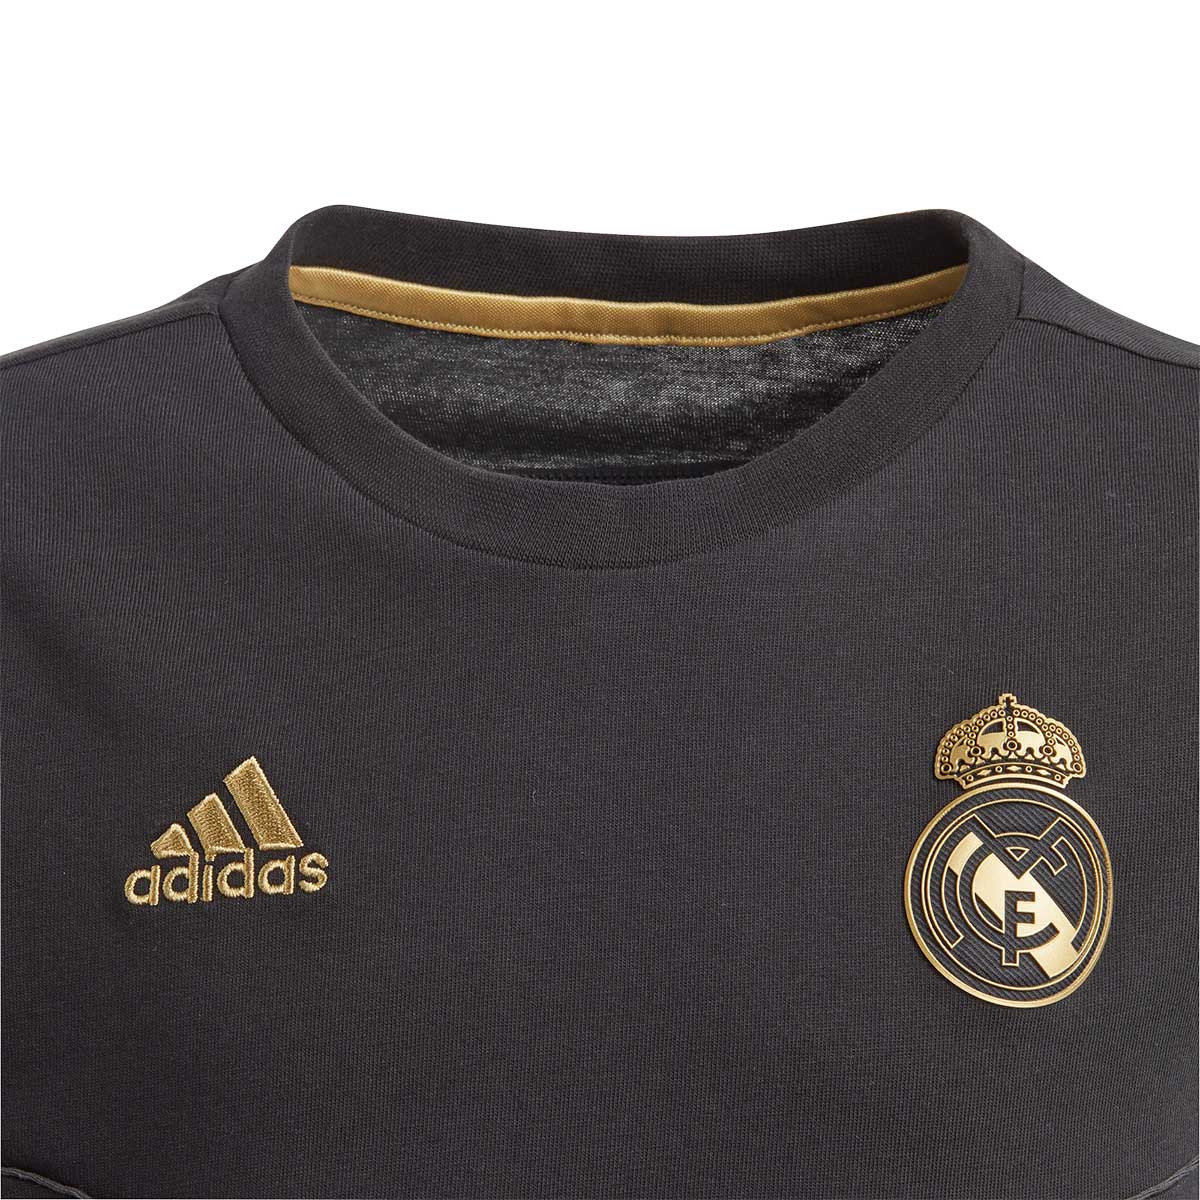 real madrid black and gold jersey